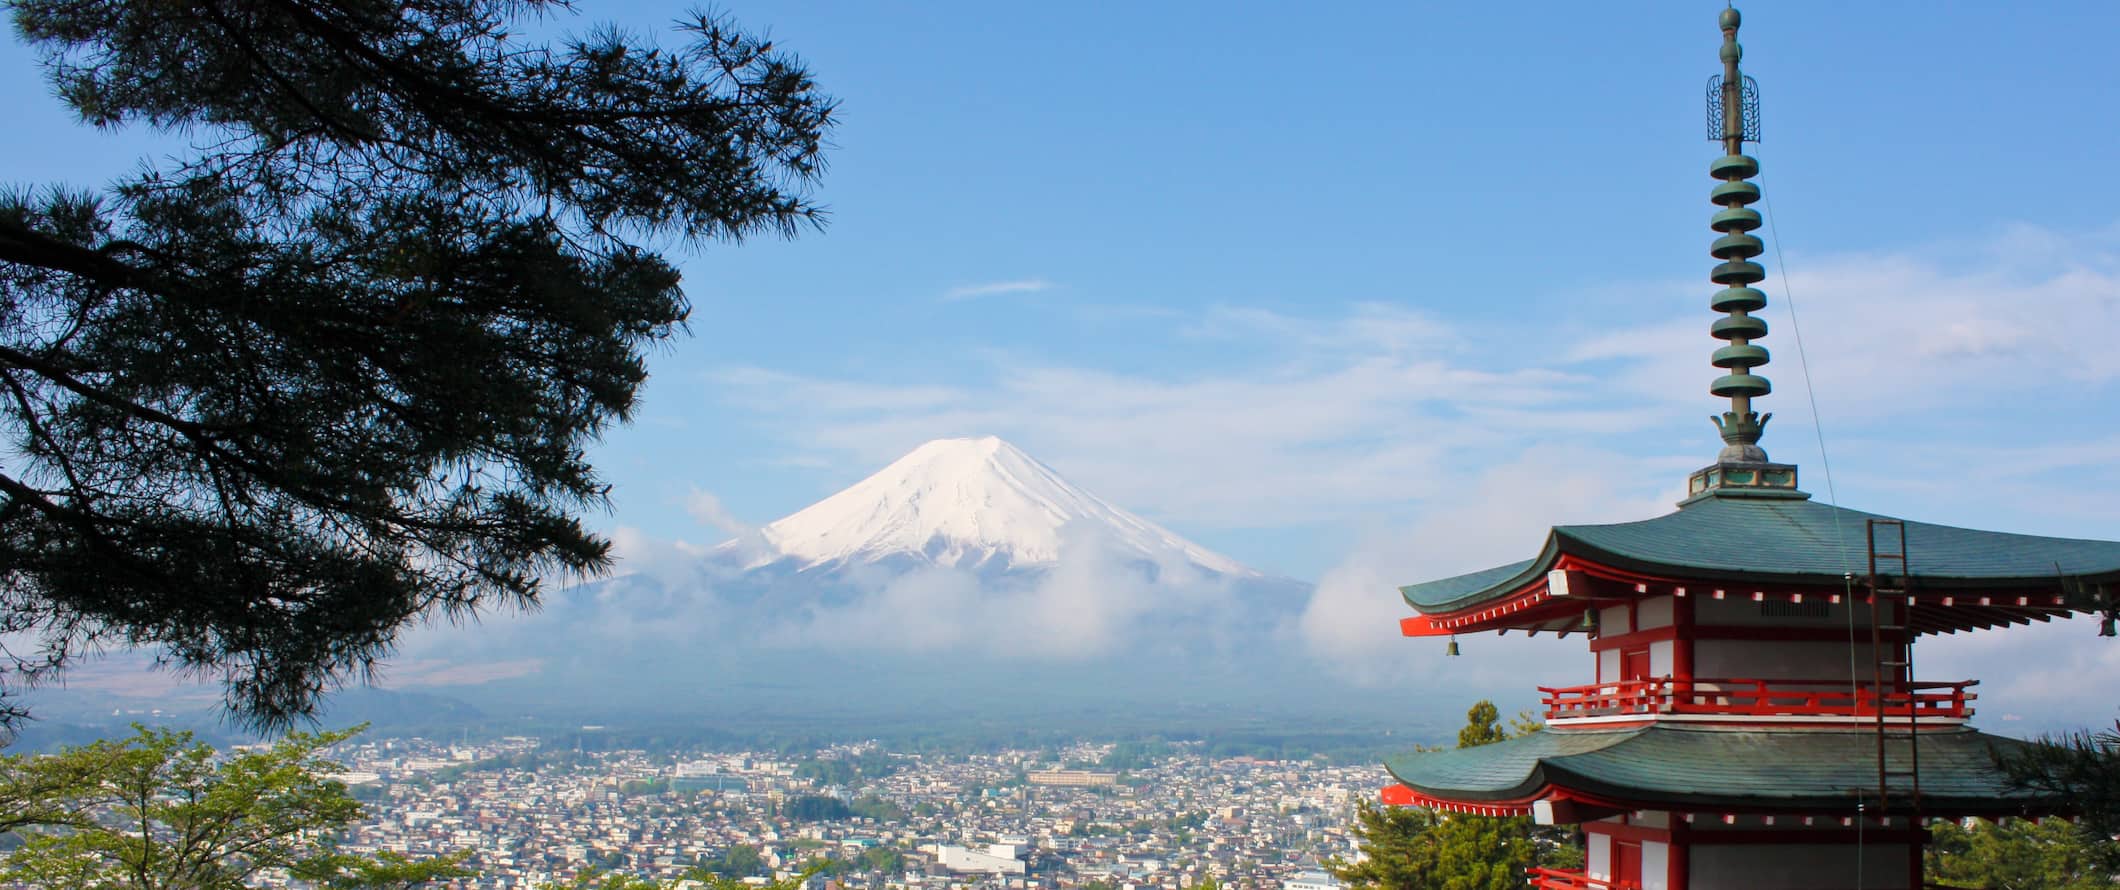 Mount Fuji in the distance on a sunny day with a pagoda in the foreground in Japan